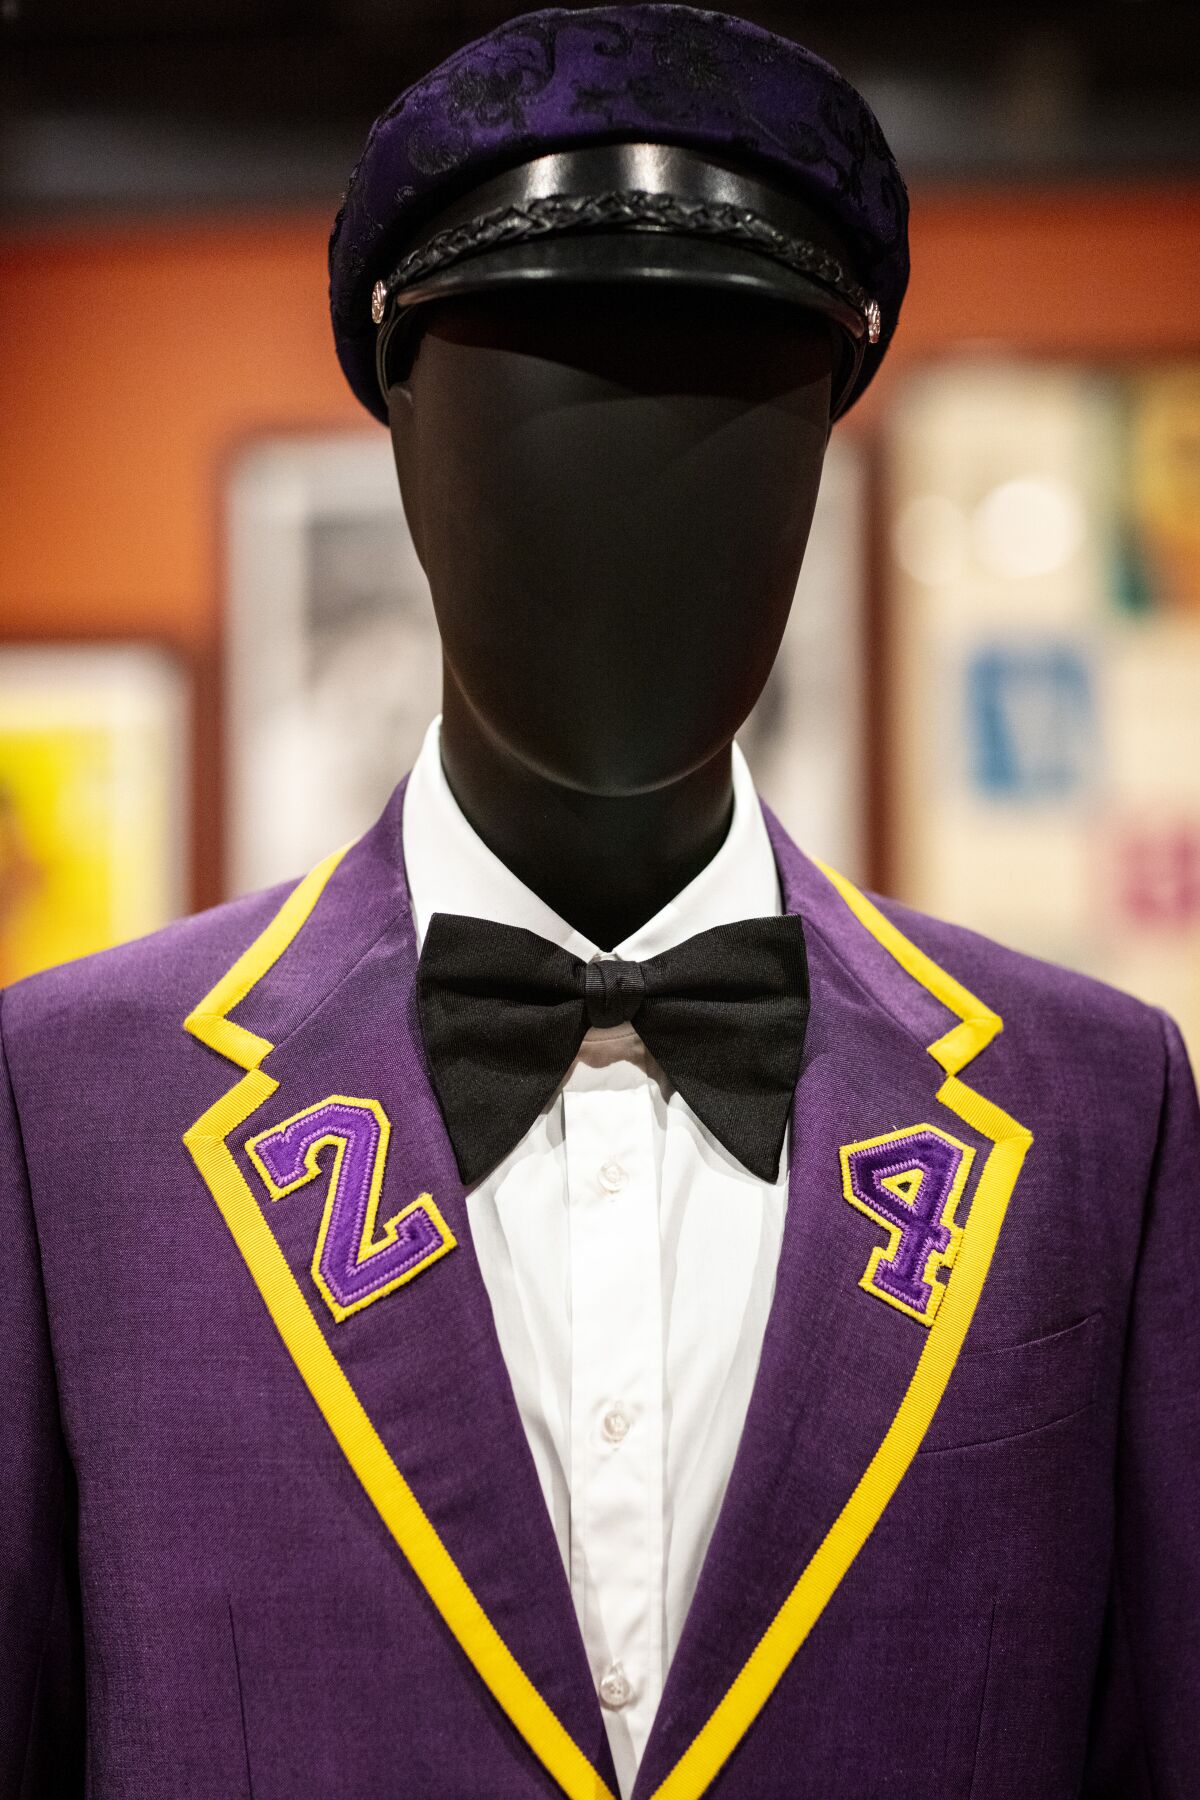 Spike Lee's custom Gucci suit honoring former Lakers star Kobe Bryant, worn to the 2020 Oscars, shortly after Bryant's death.